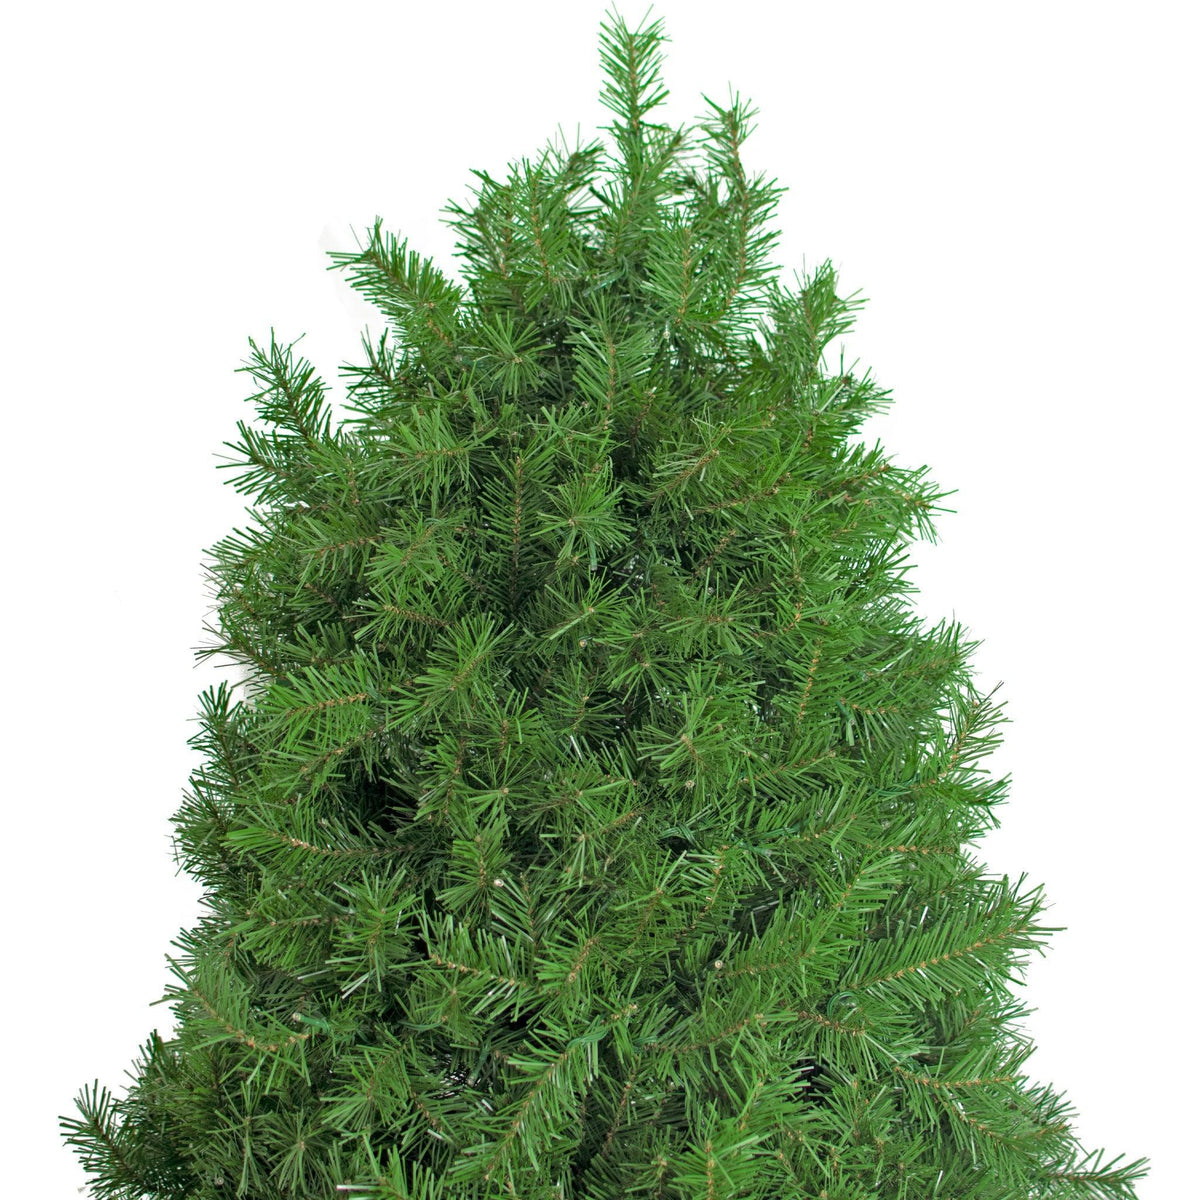 Top of the 10FT Premier Pine Tree Pre-Lit with LED Lights.  On sale from leedisplay.com